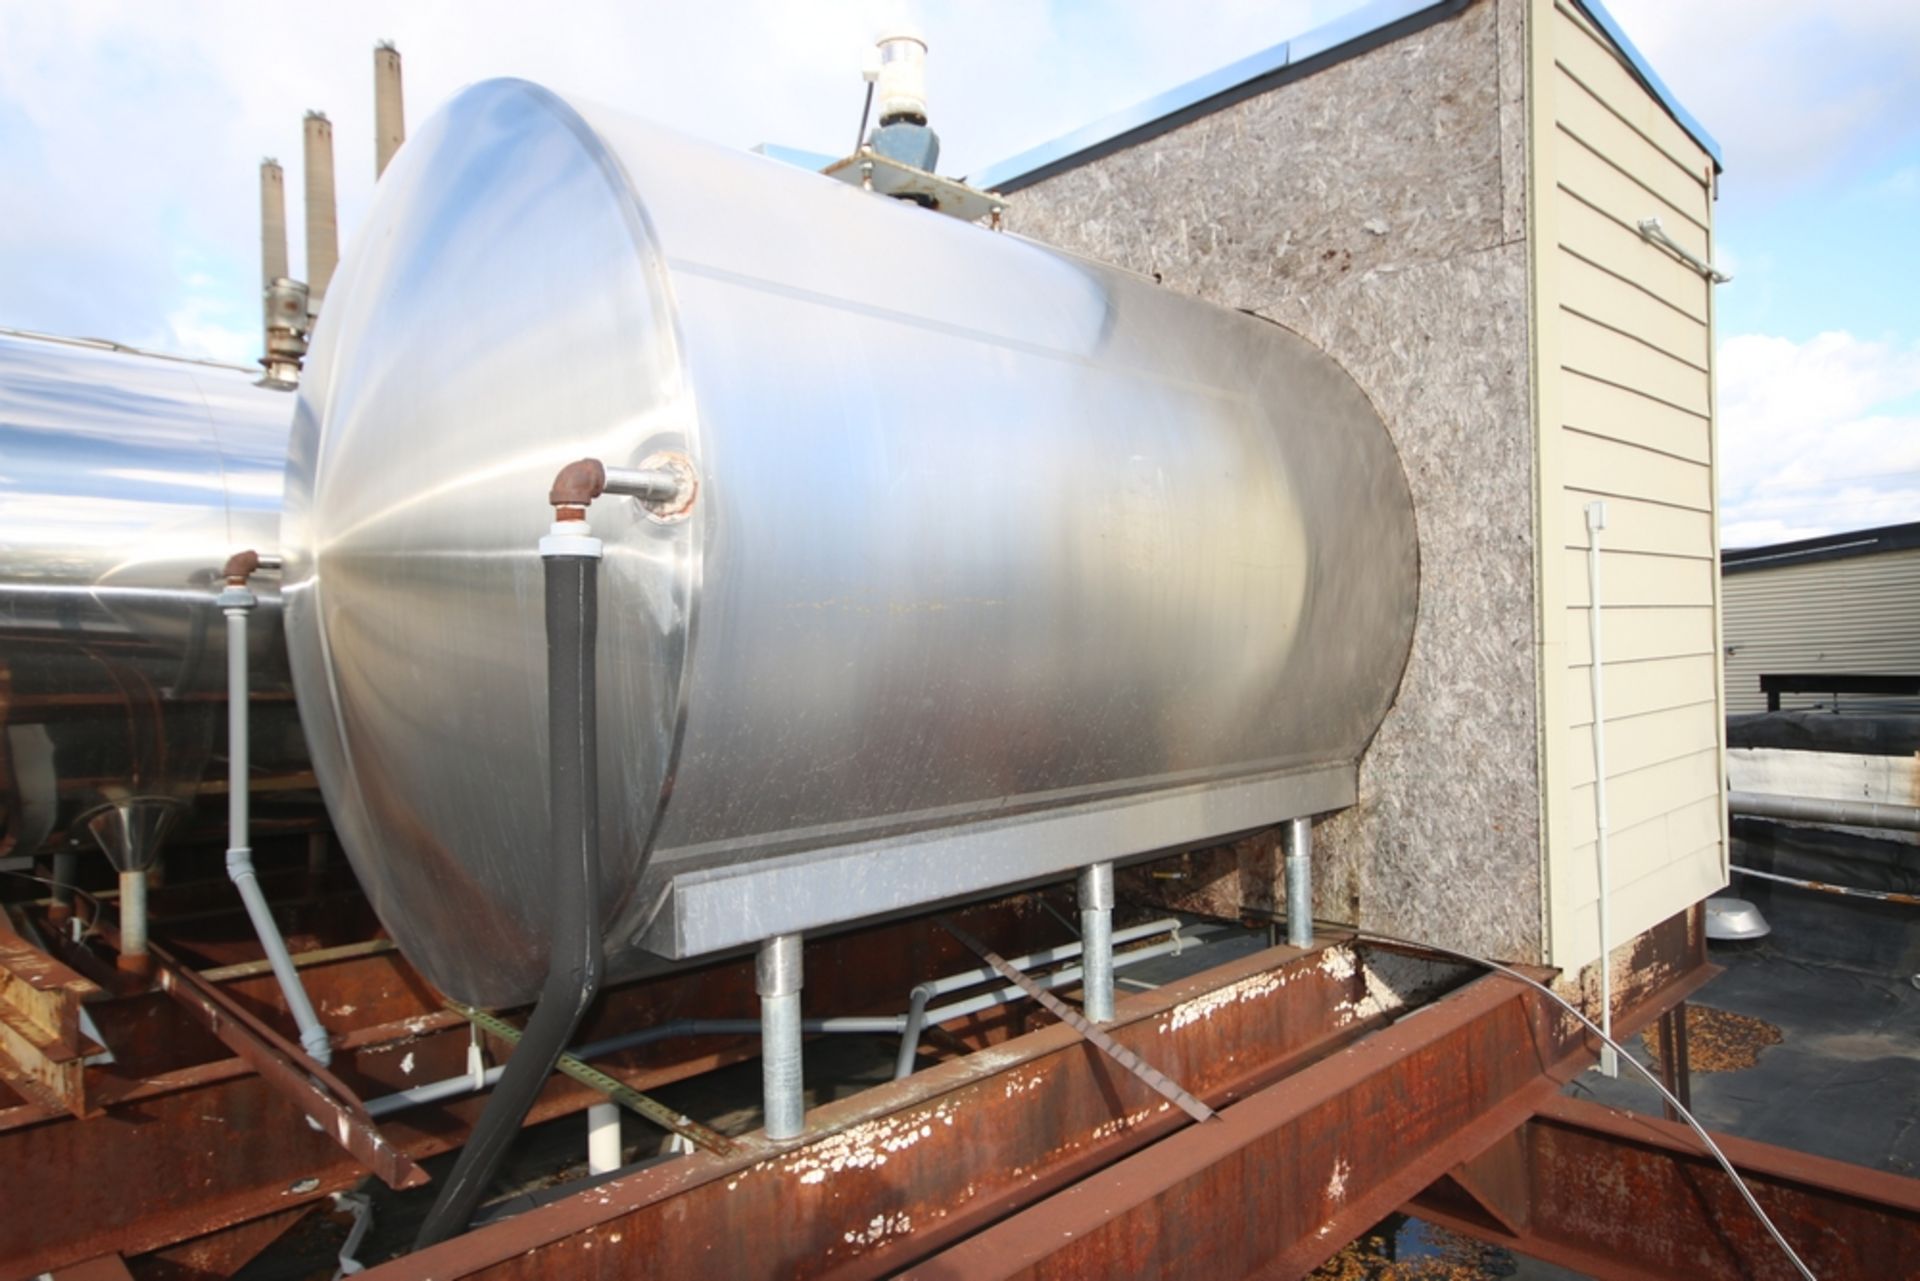 Cherry-Burrel 3,000 Gal. Jacketed Horizontal Tank, with Dual S/S Spray Ball, with Quad Prop Veritcal - Image 5 of 16